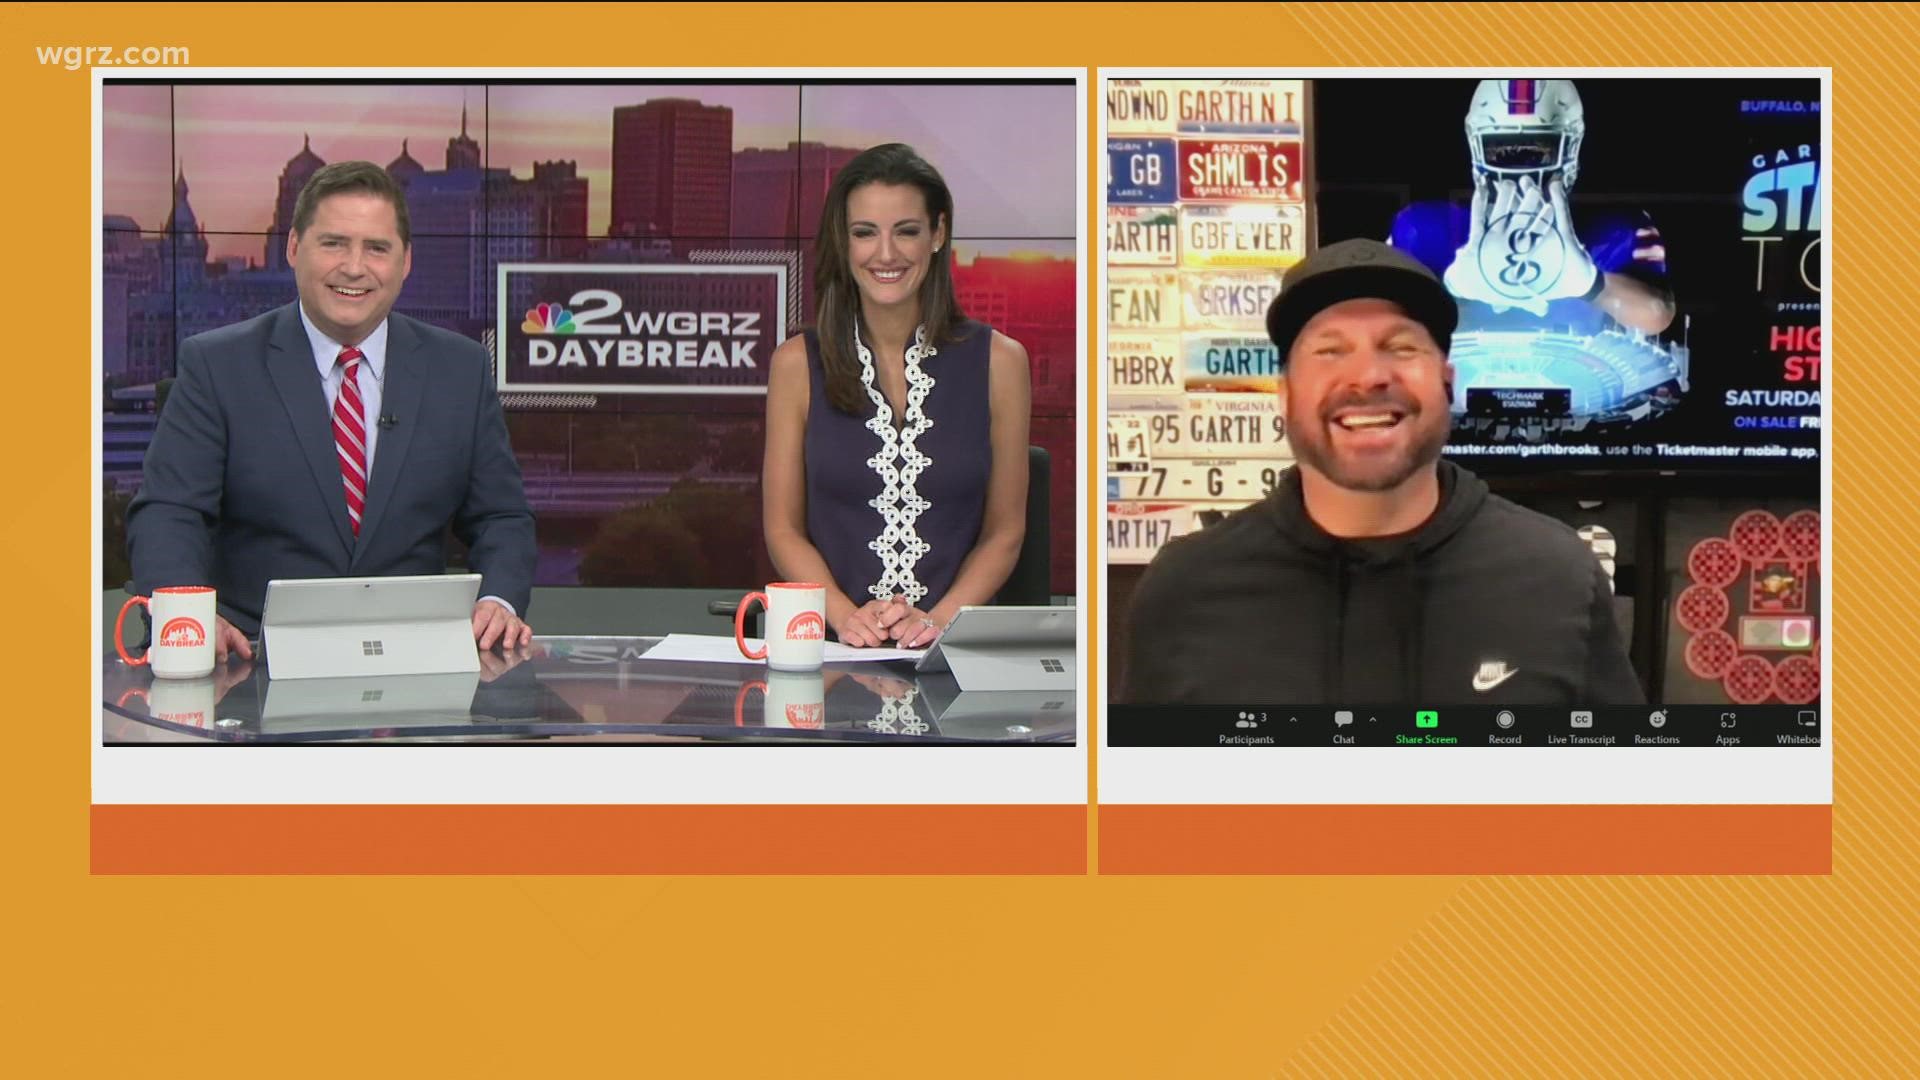 With tickets going on sale Friday morning, Garth Brooks joins Daybreak to talk about his return to Buffalo with a concert at Highmark Stadium July 23.